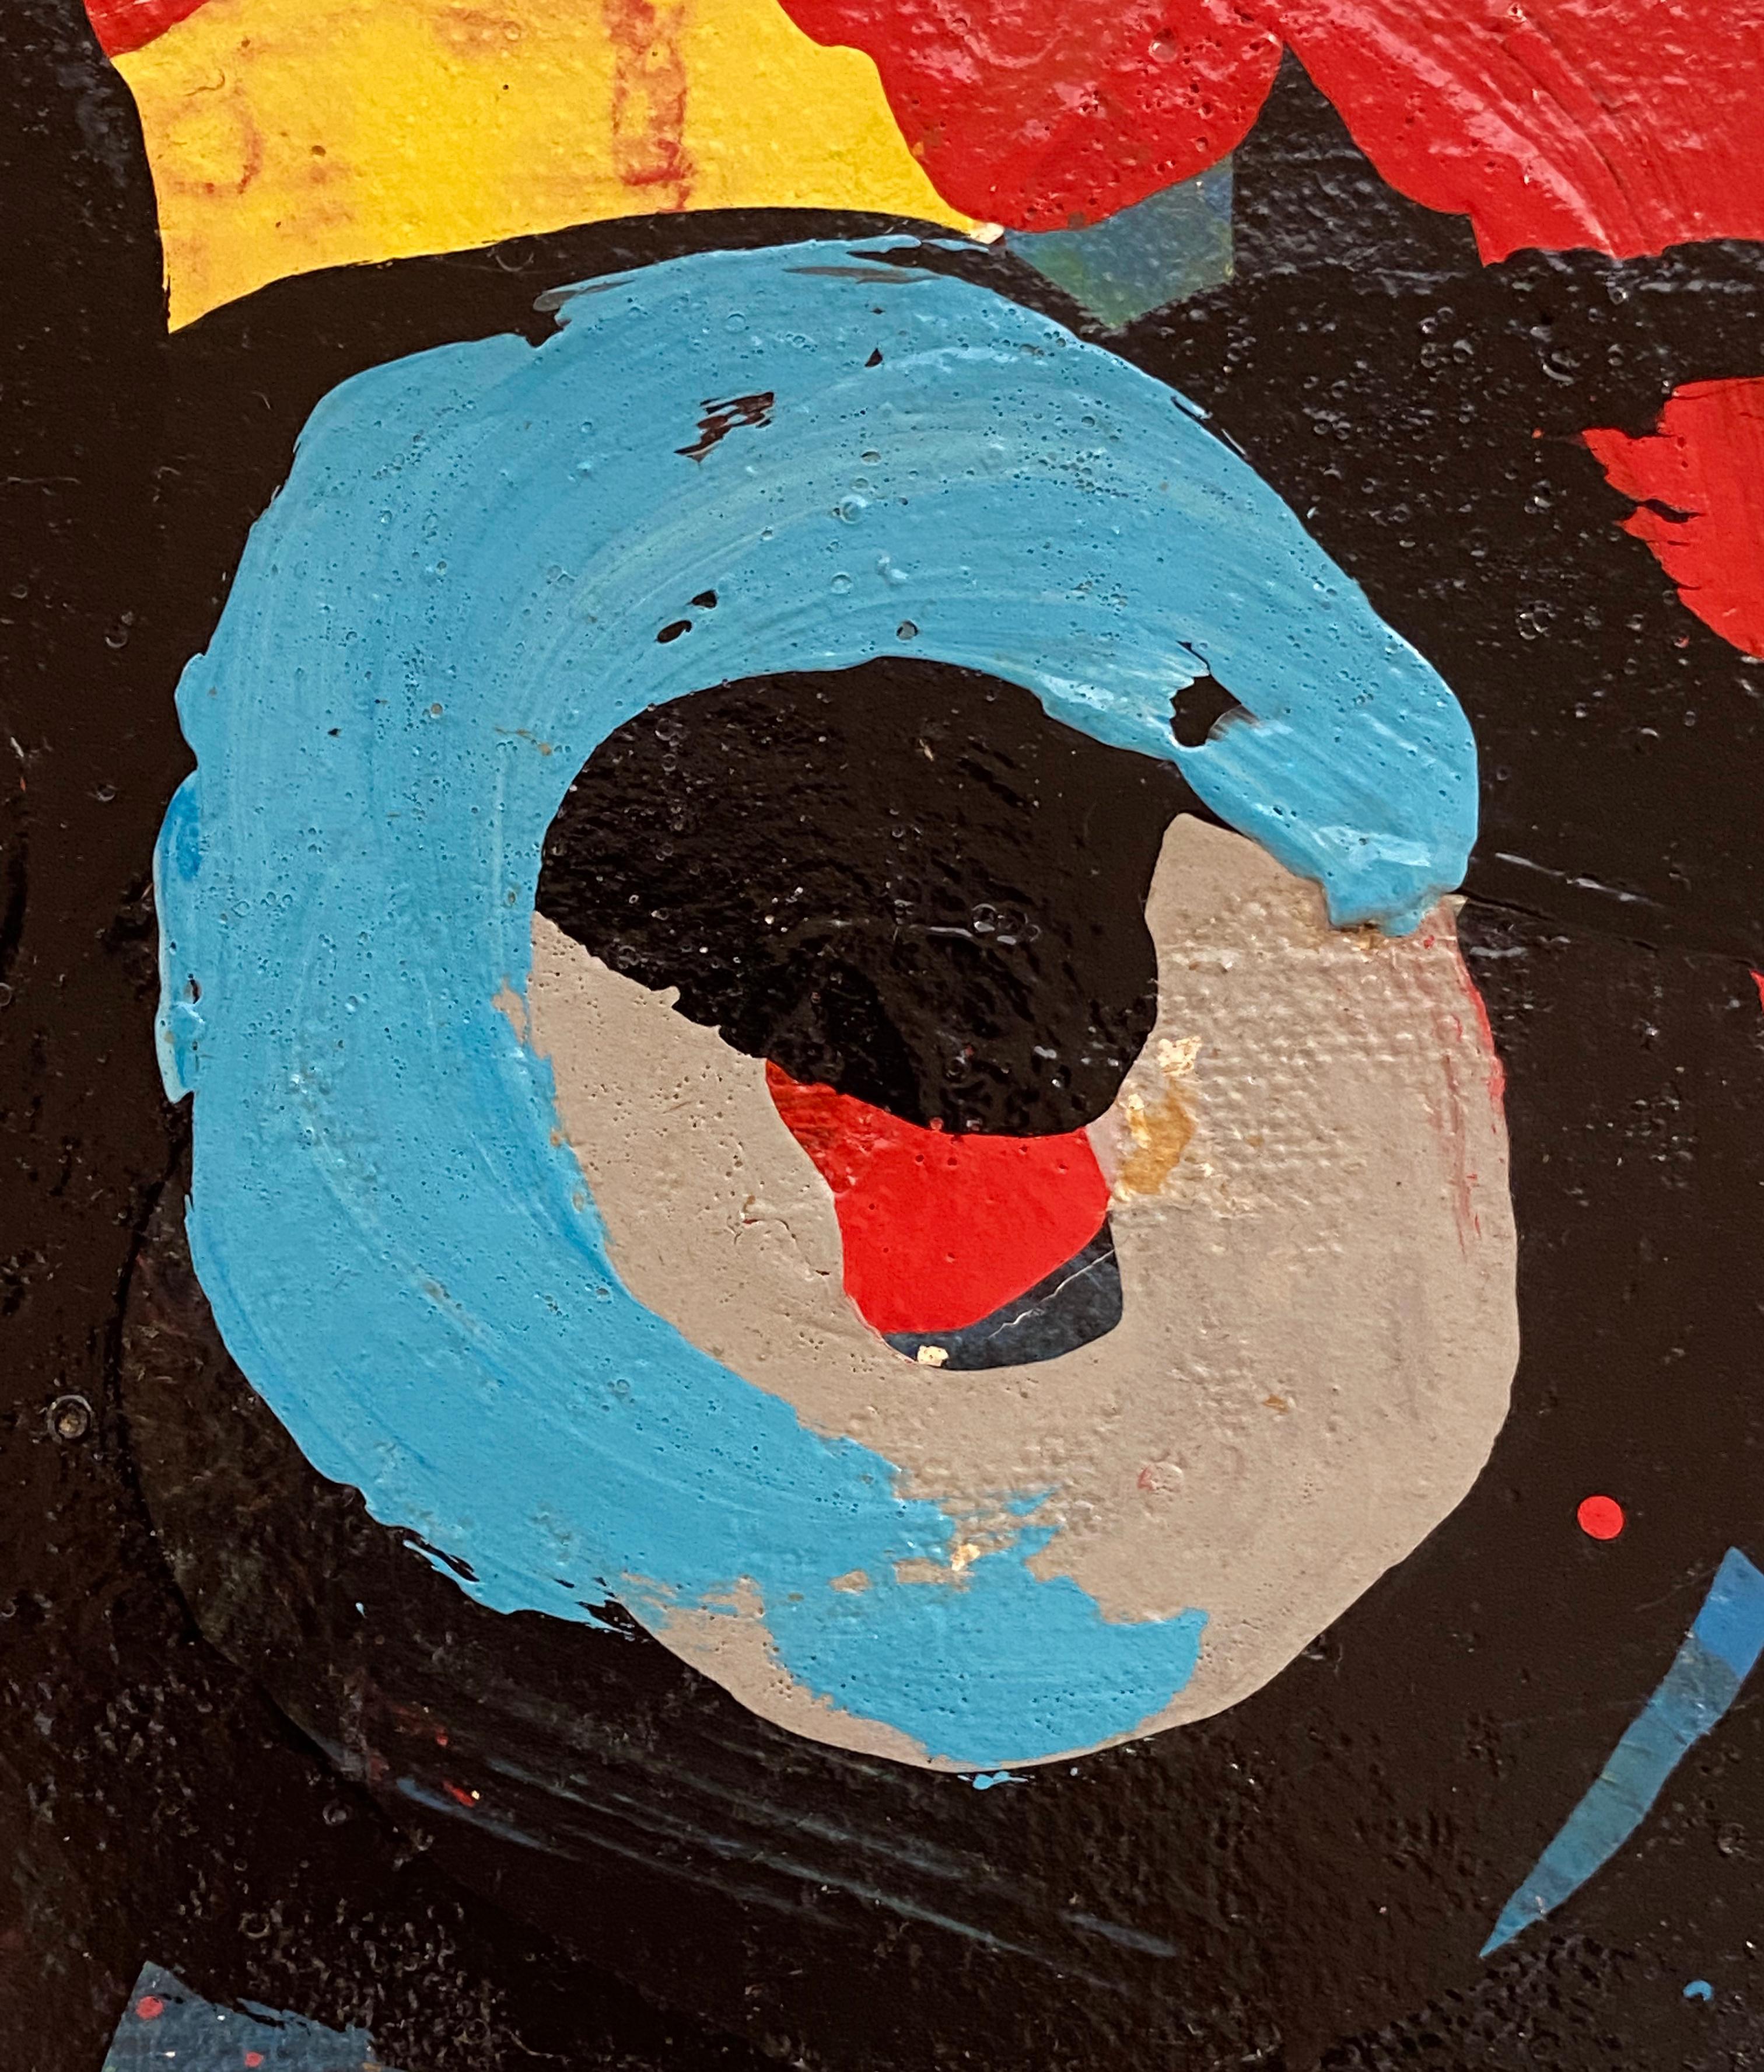 Karel Appel is internationally recognized and collected for this subject matter in particular.  Preferable to have the faces, this piece has rich color and presence.  Good value and beautifully framed.  He was a part of the important CoBRa movement